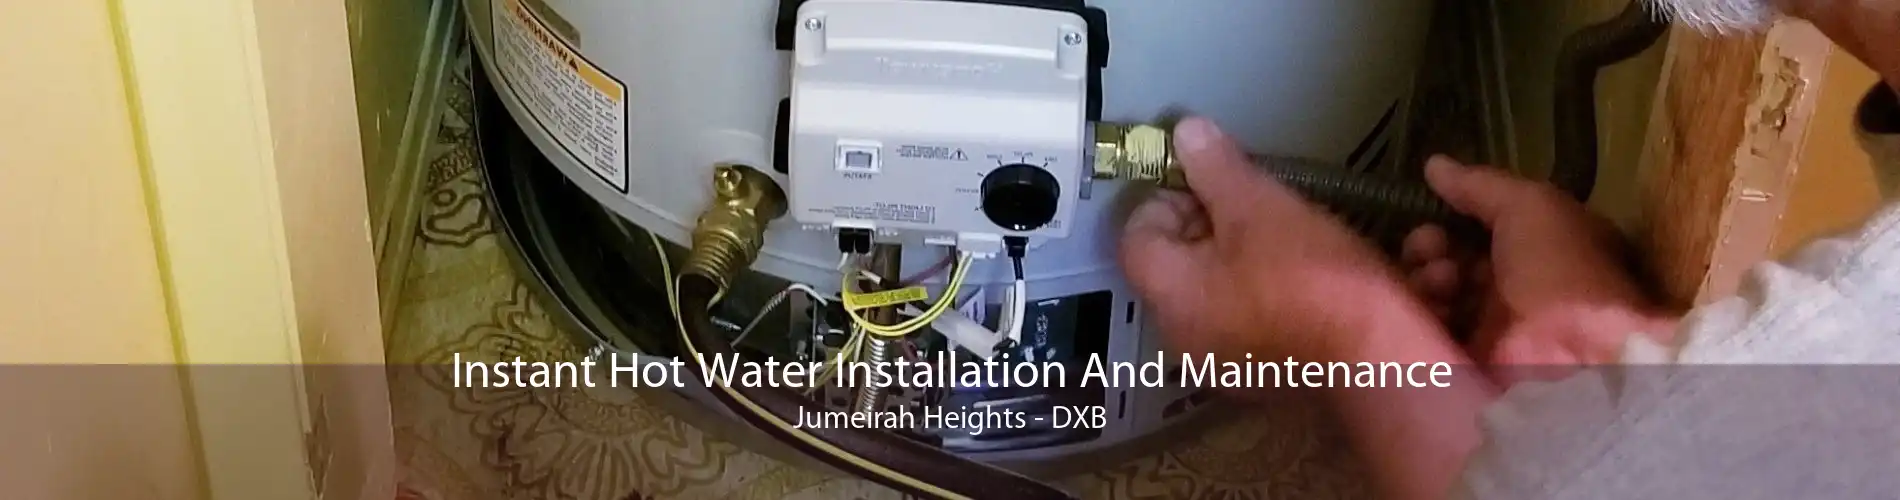 Instant Hot Water Installation And Maintenance Jumeirah Heights - DXB